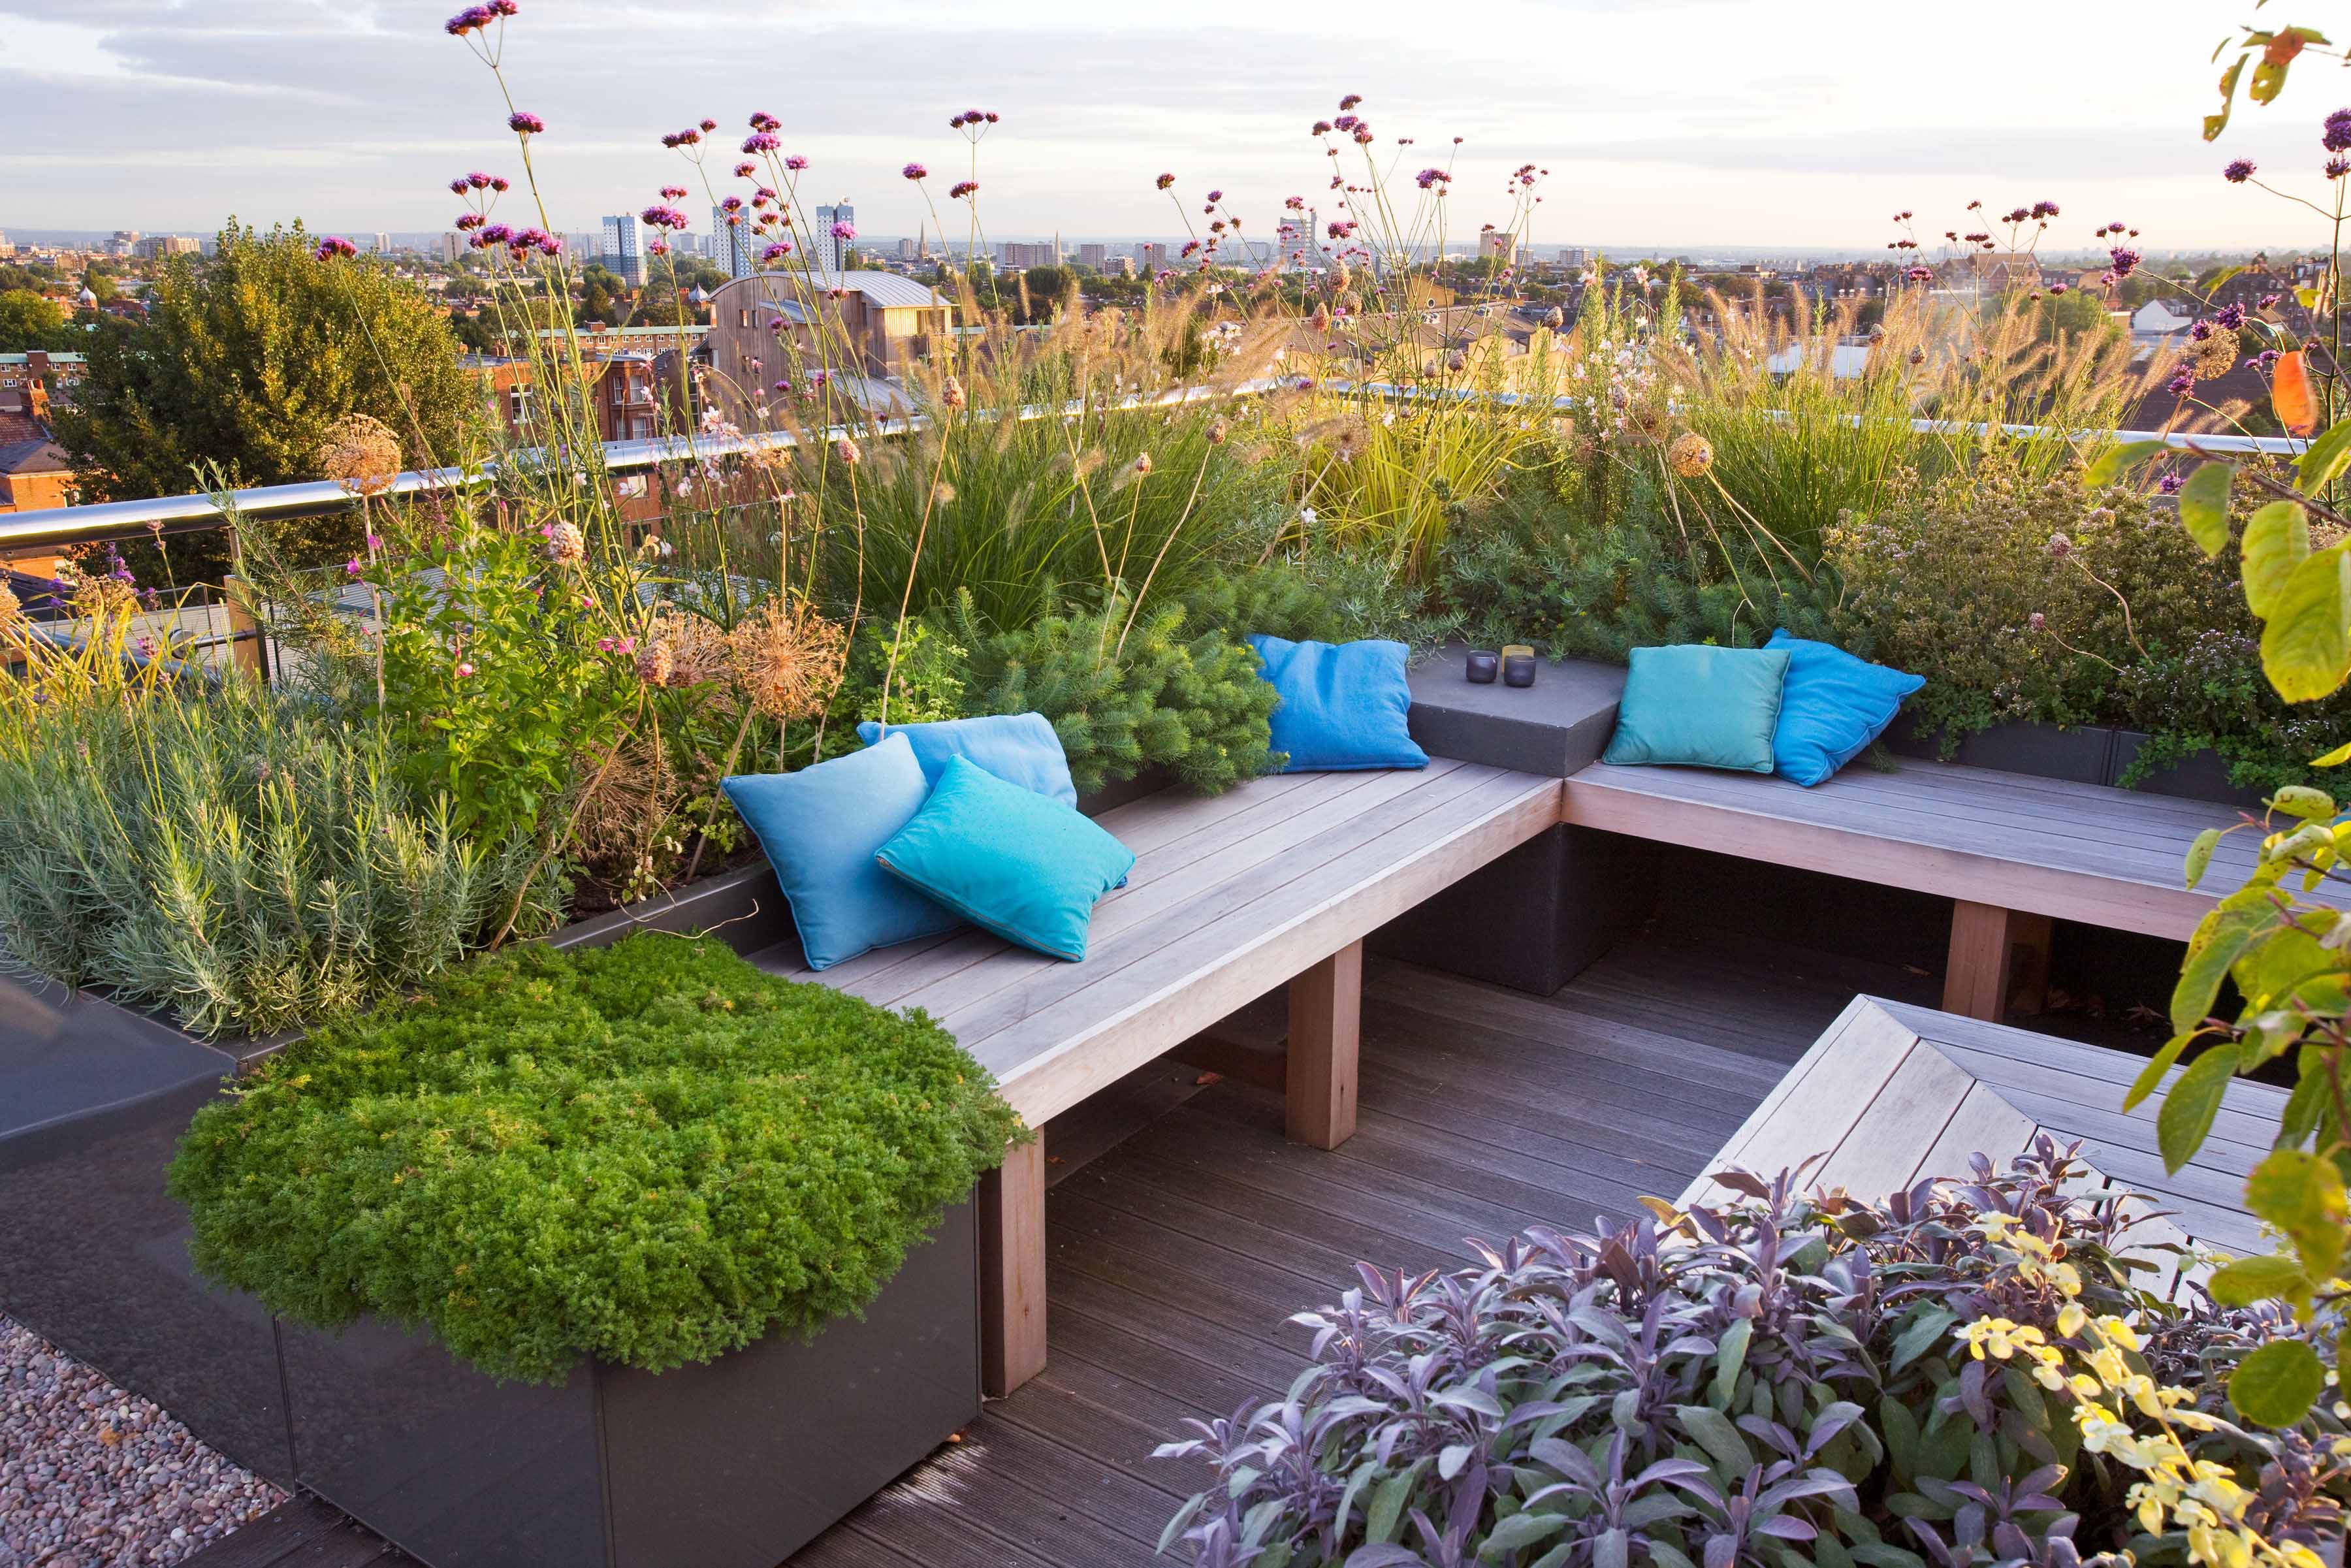 Rooftop seating and plants